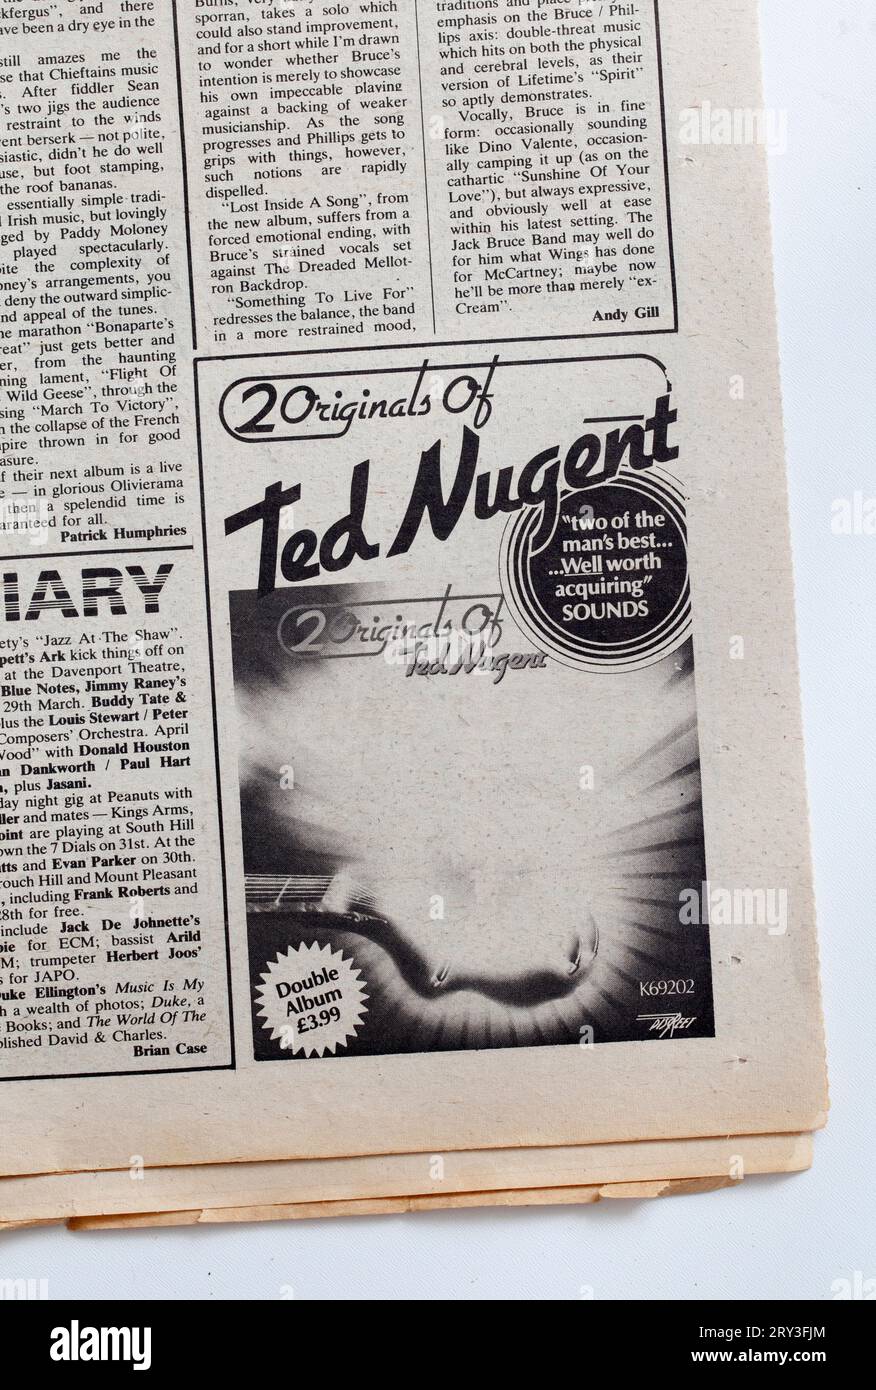 Advert for Ted Nugent LP in 1970s issue of NME New Musical Express Music Paper Stock Photo